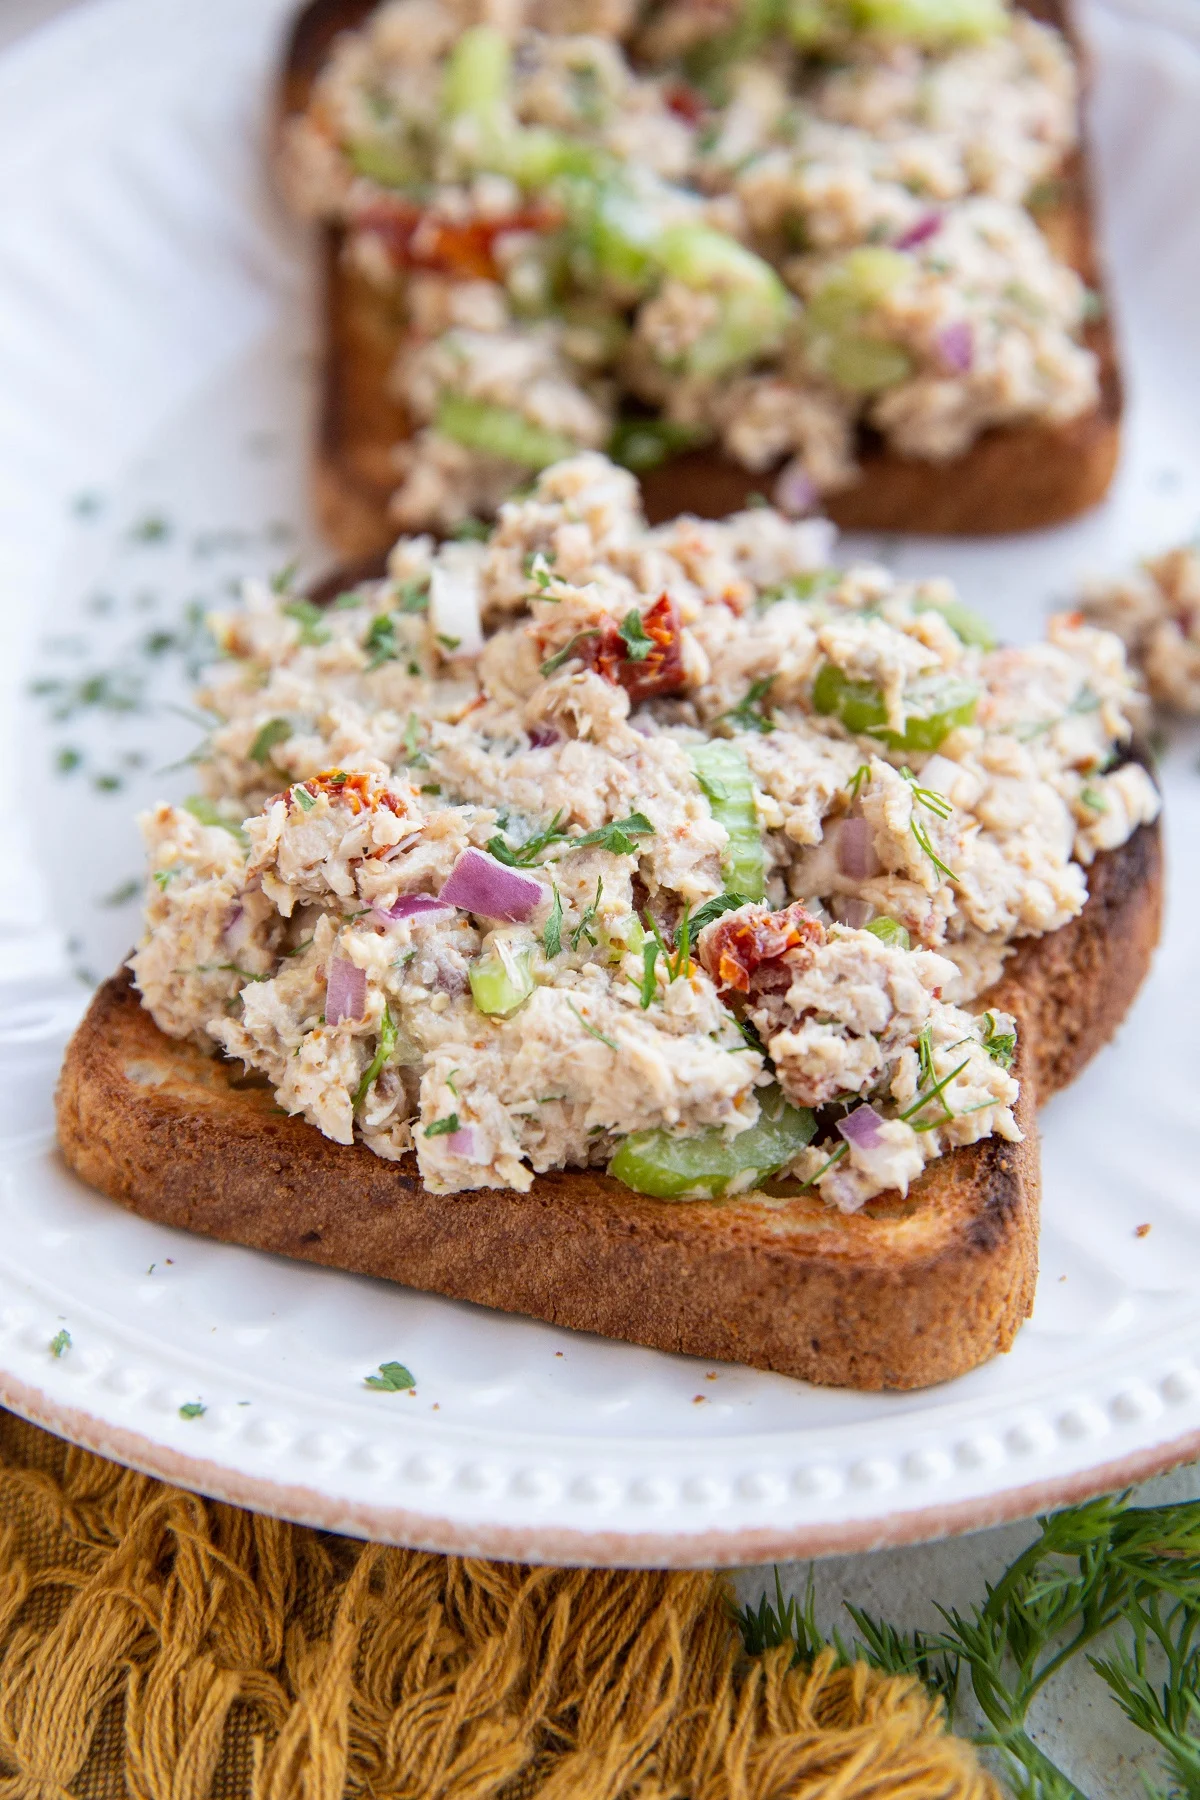 Two slices of toasted bread on a plate with tuna salad on top.